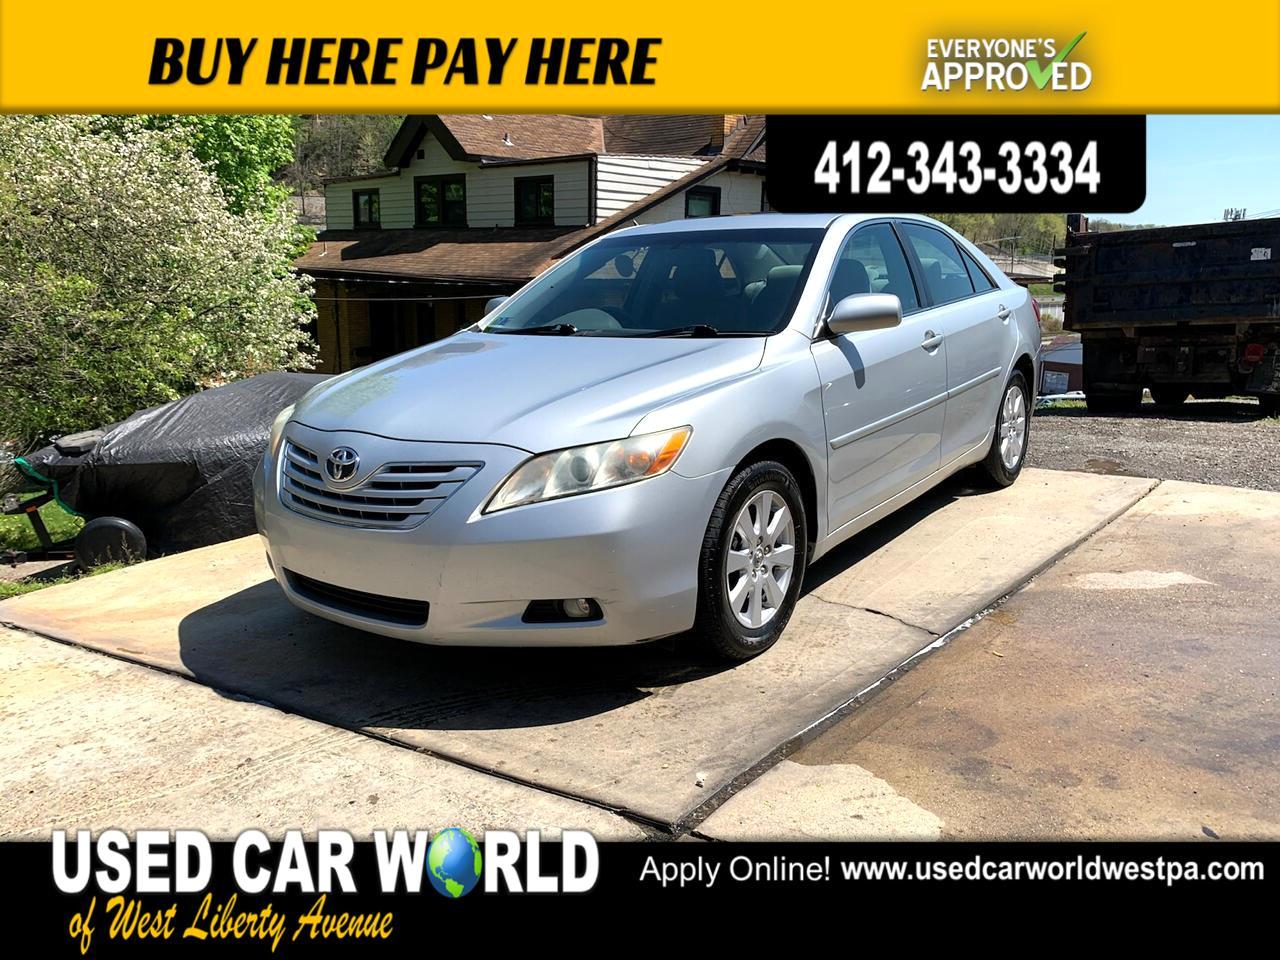 Used 2007 Toyota Camry XLE for Sale in Pittsburgh PA 15226 Used Car ...